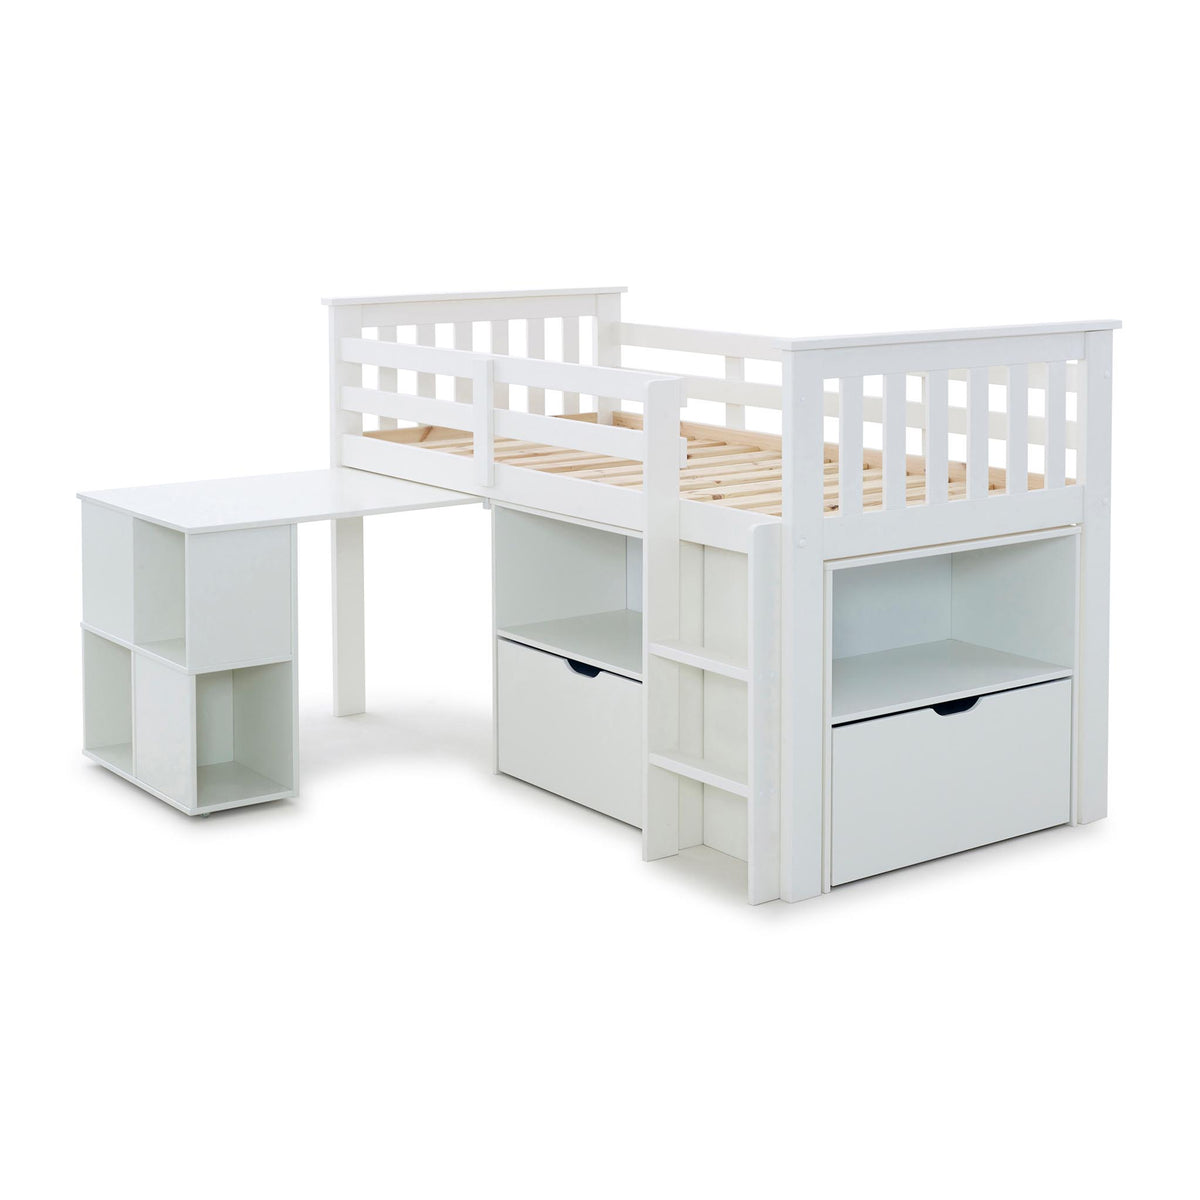 Huckerby White Childrens Sleep Station Storage Bed with pull out table